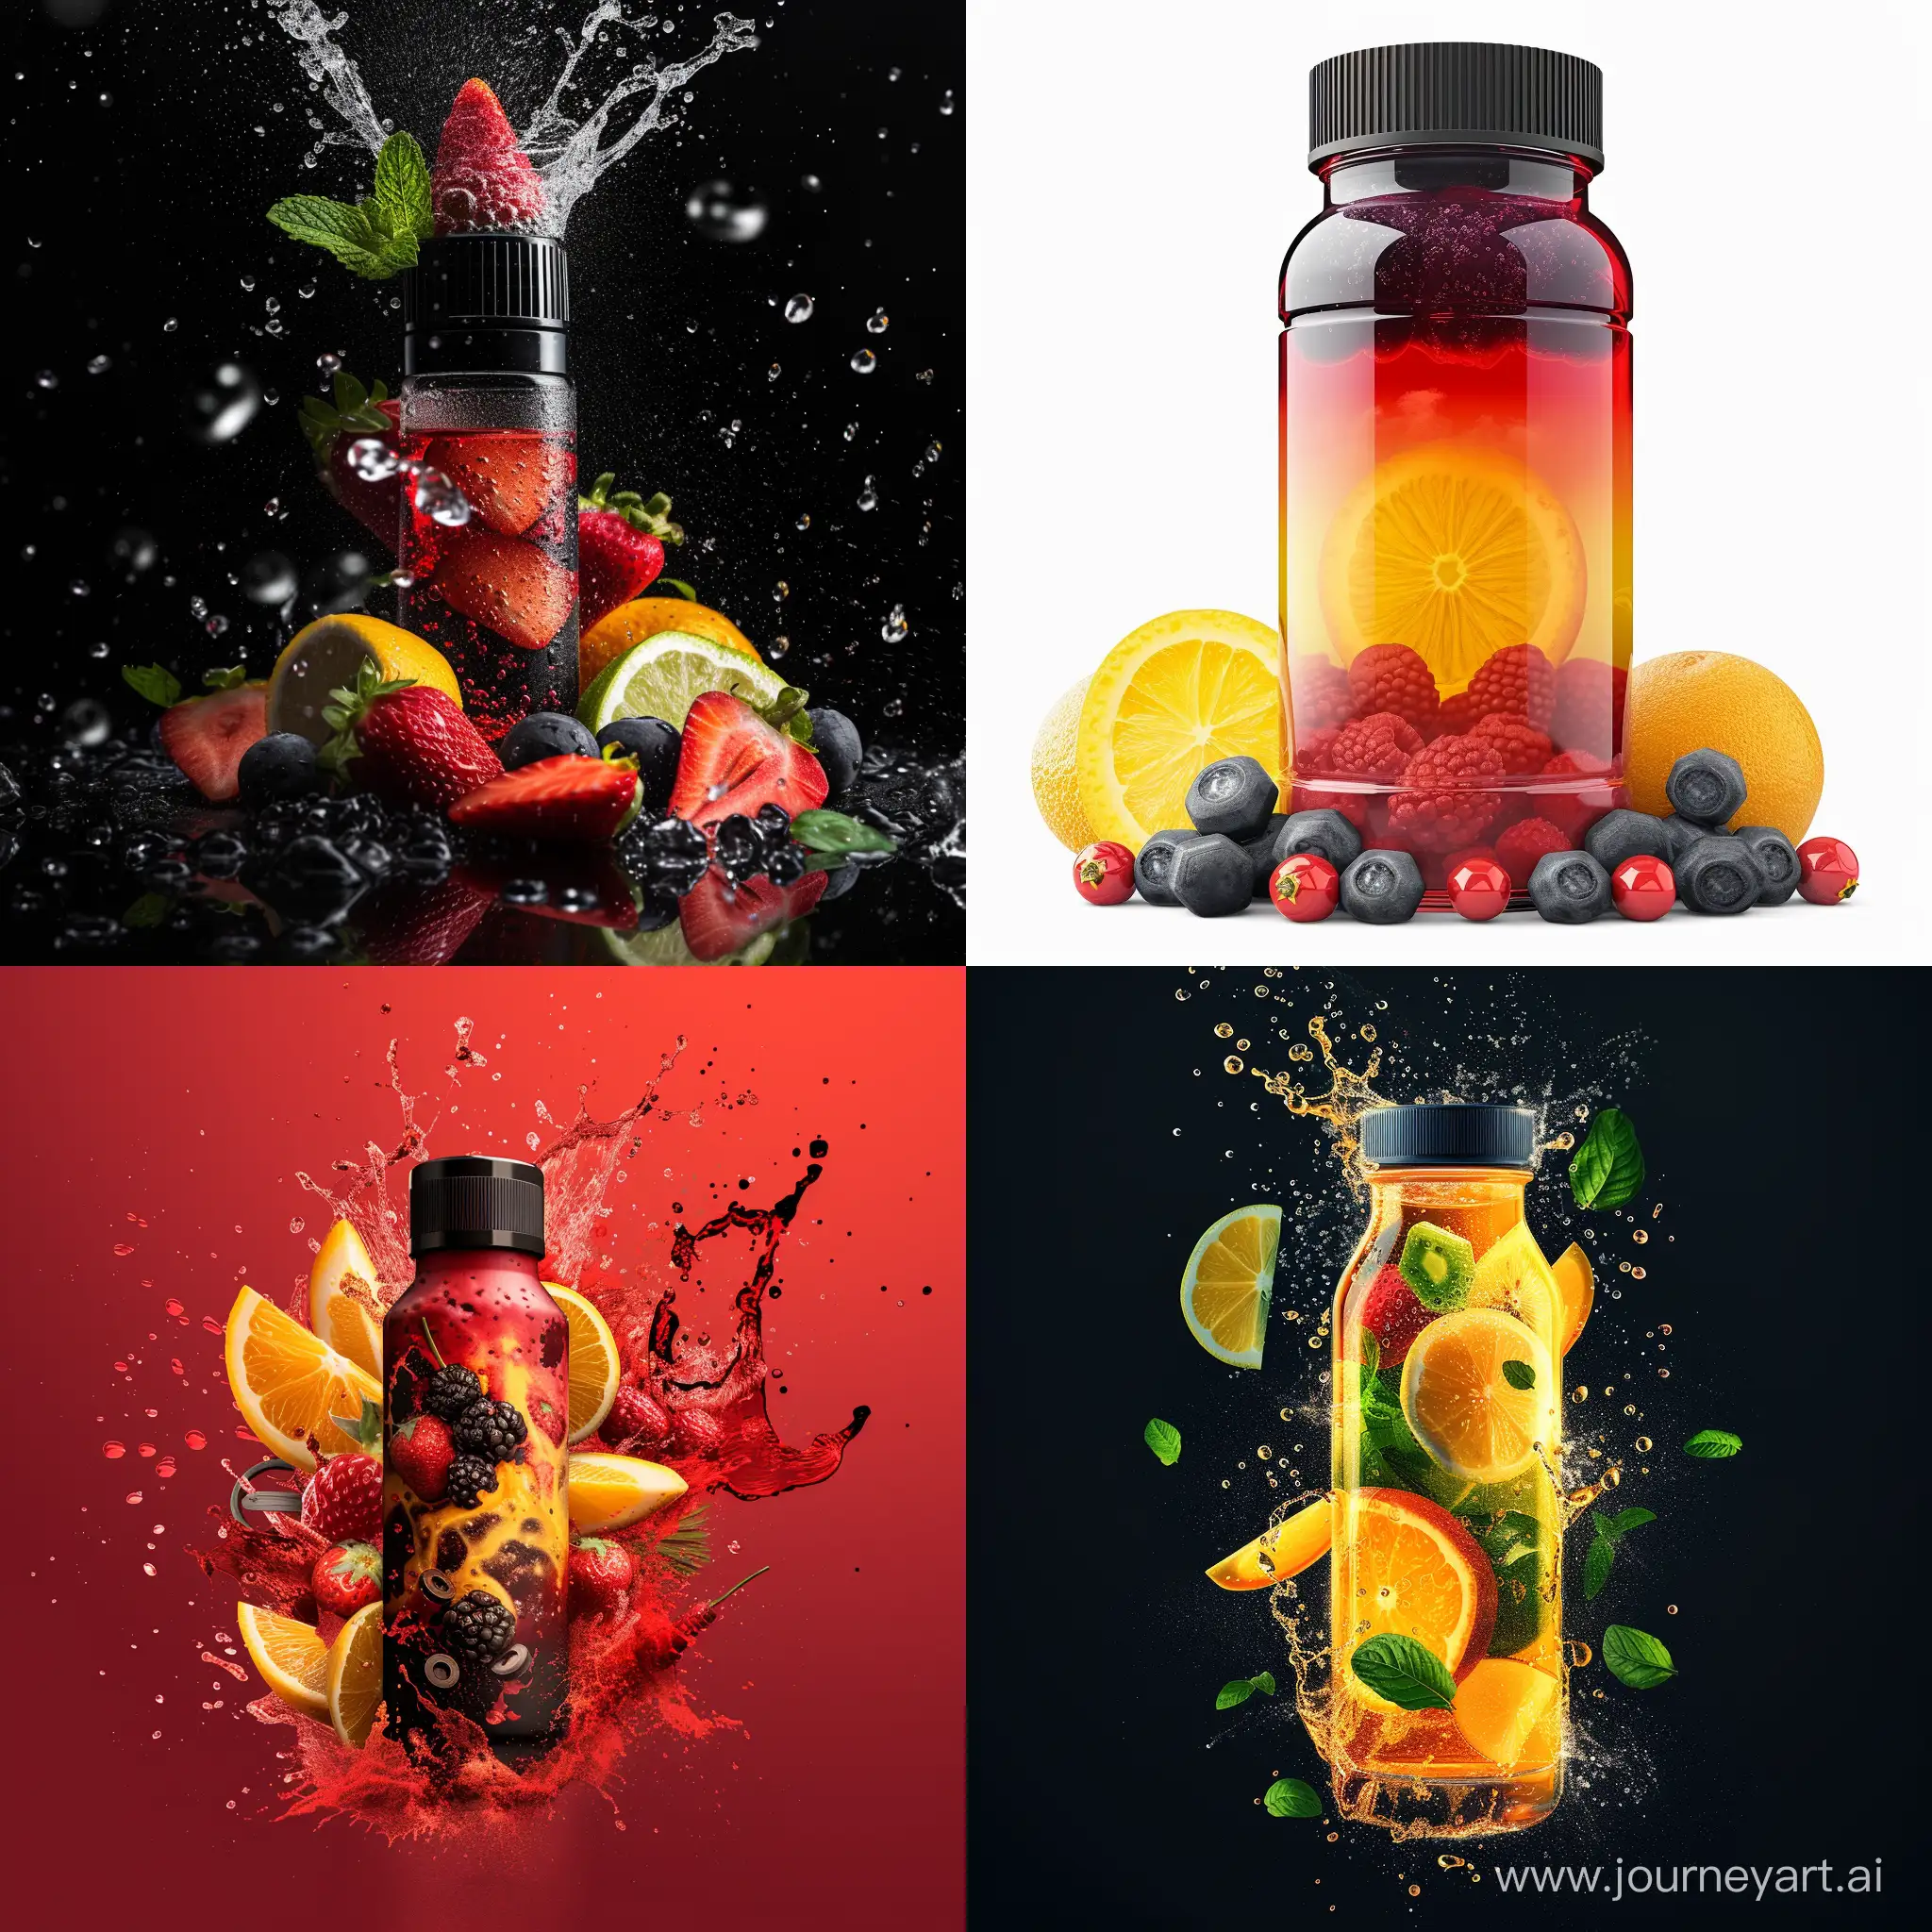 A new energidrink with all the same ingredients that are in pre-workout formula. Make it eye catching, and make the buyer want it for their workout
